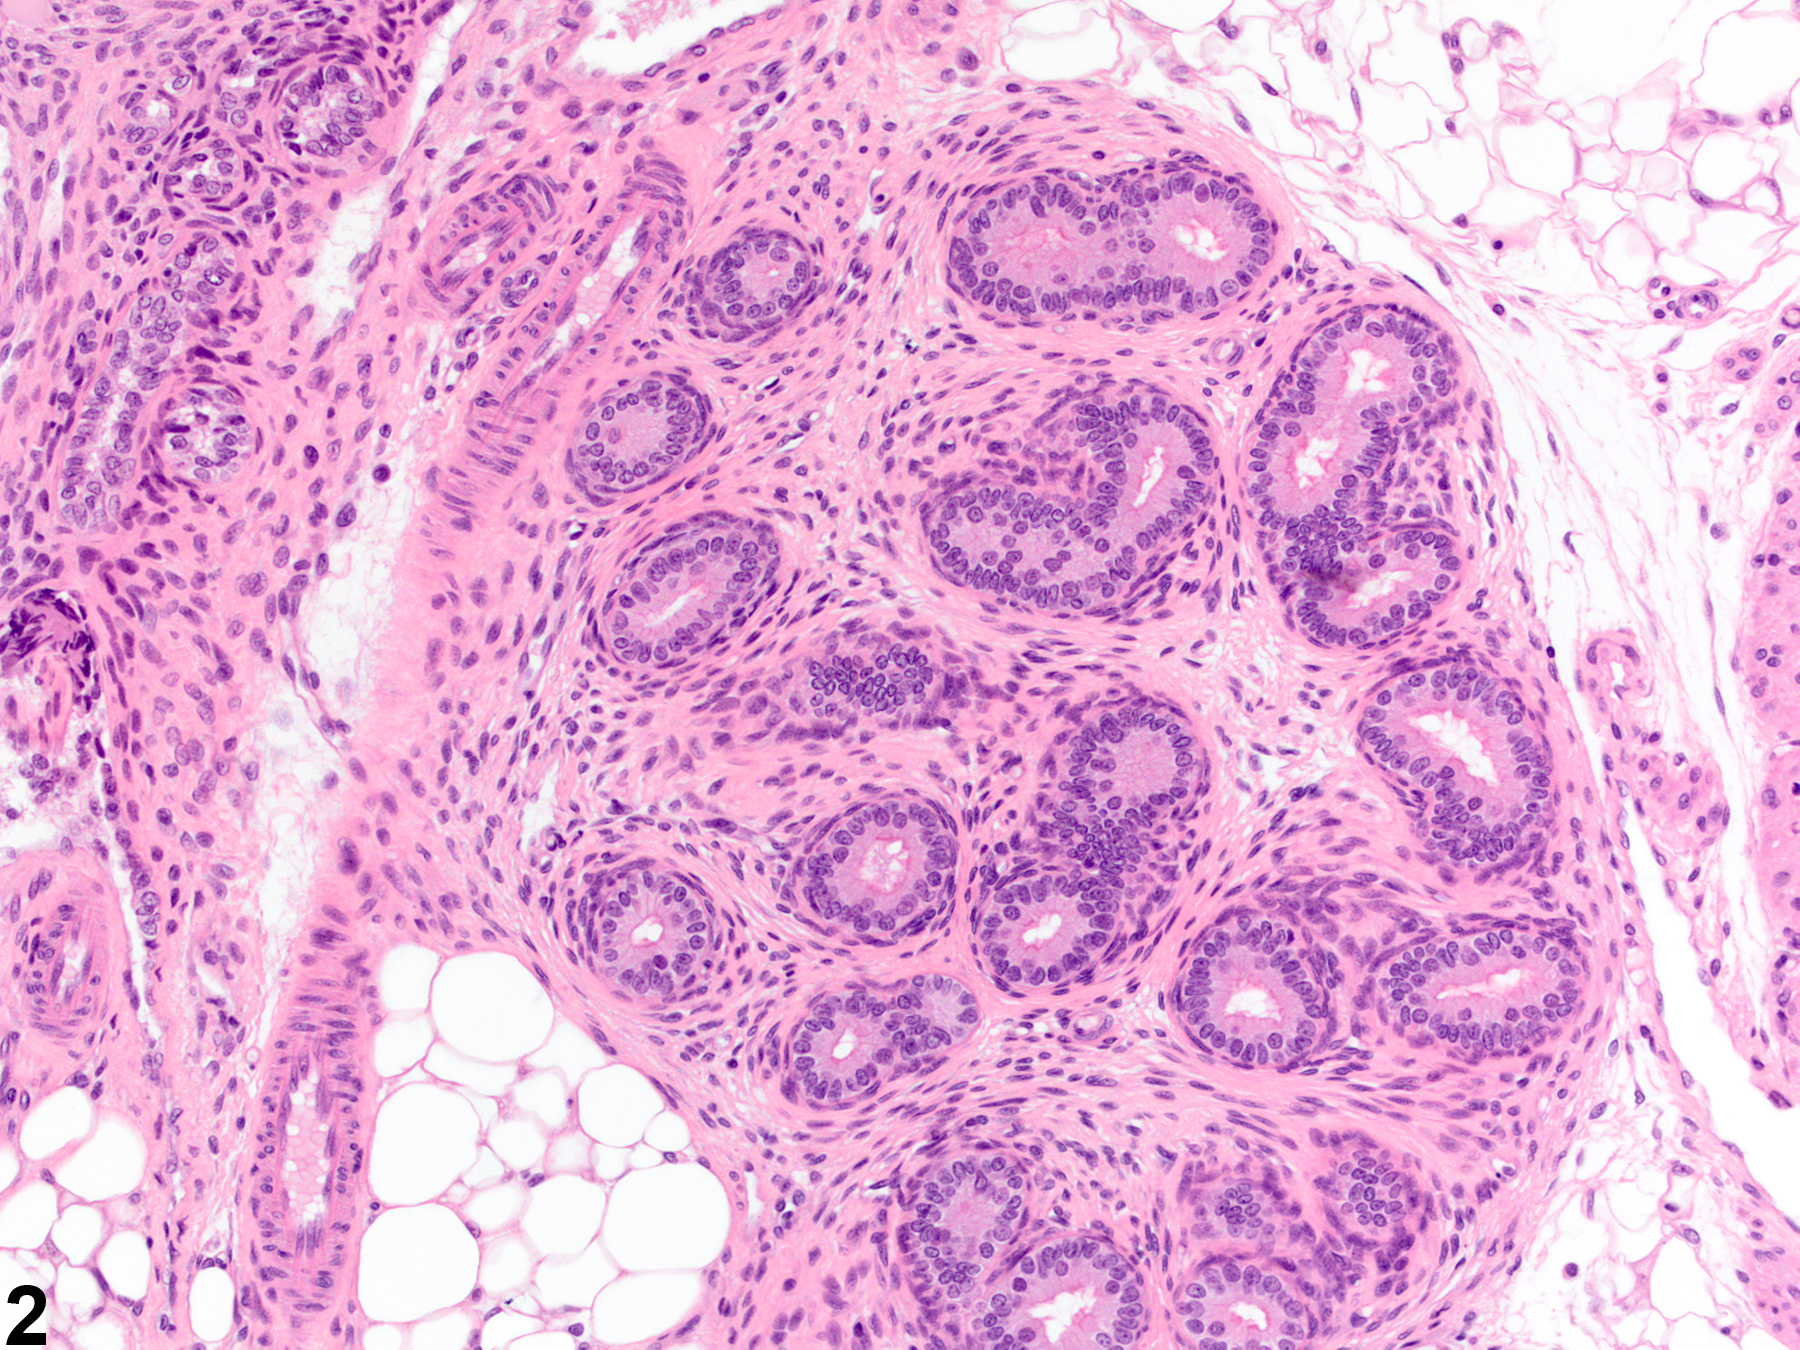 Image of mesonephric duct remnant in the ovary from a female Wistar Han rat in a subchronic study